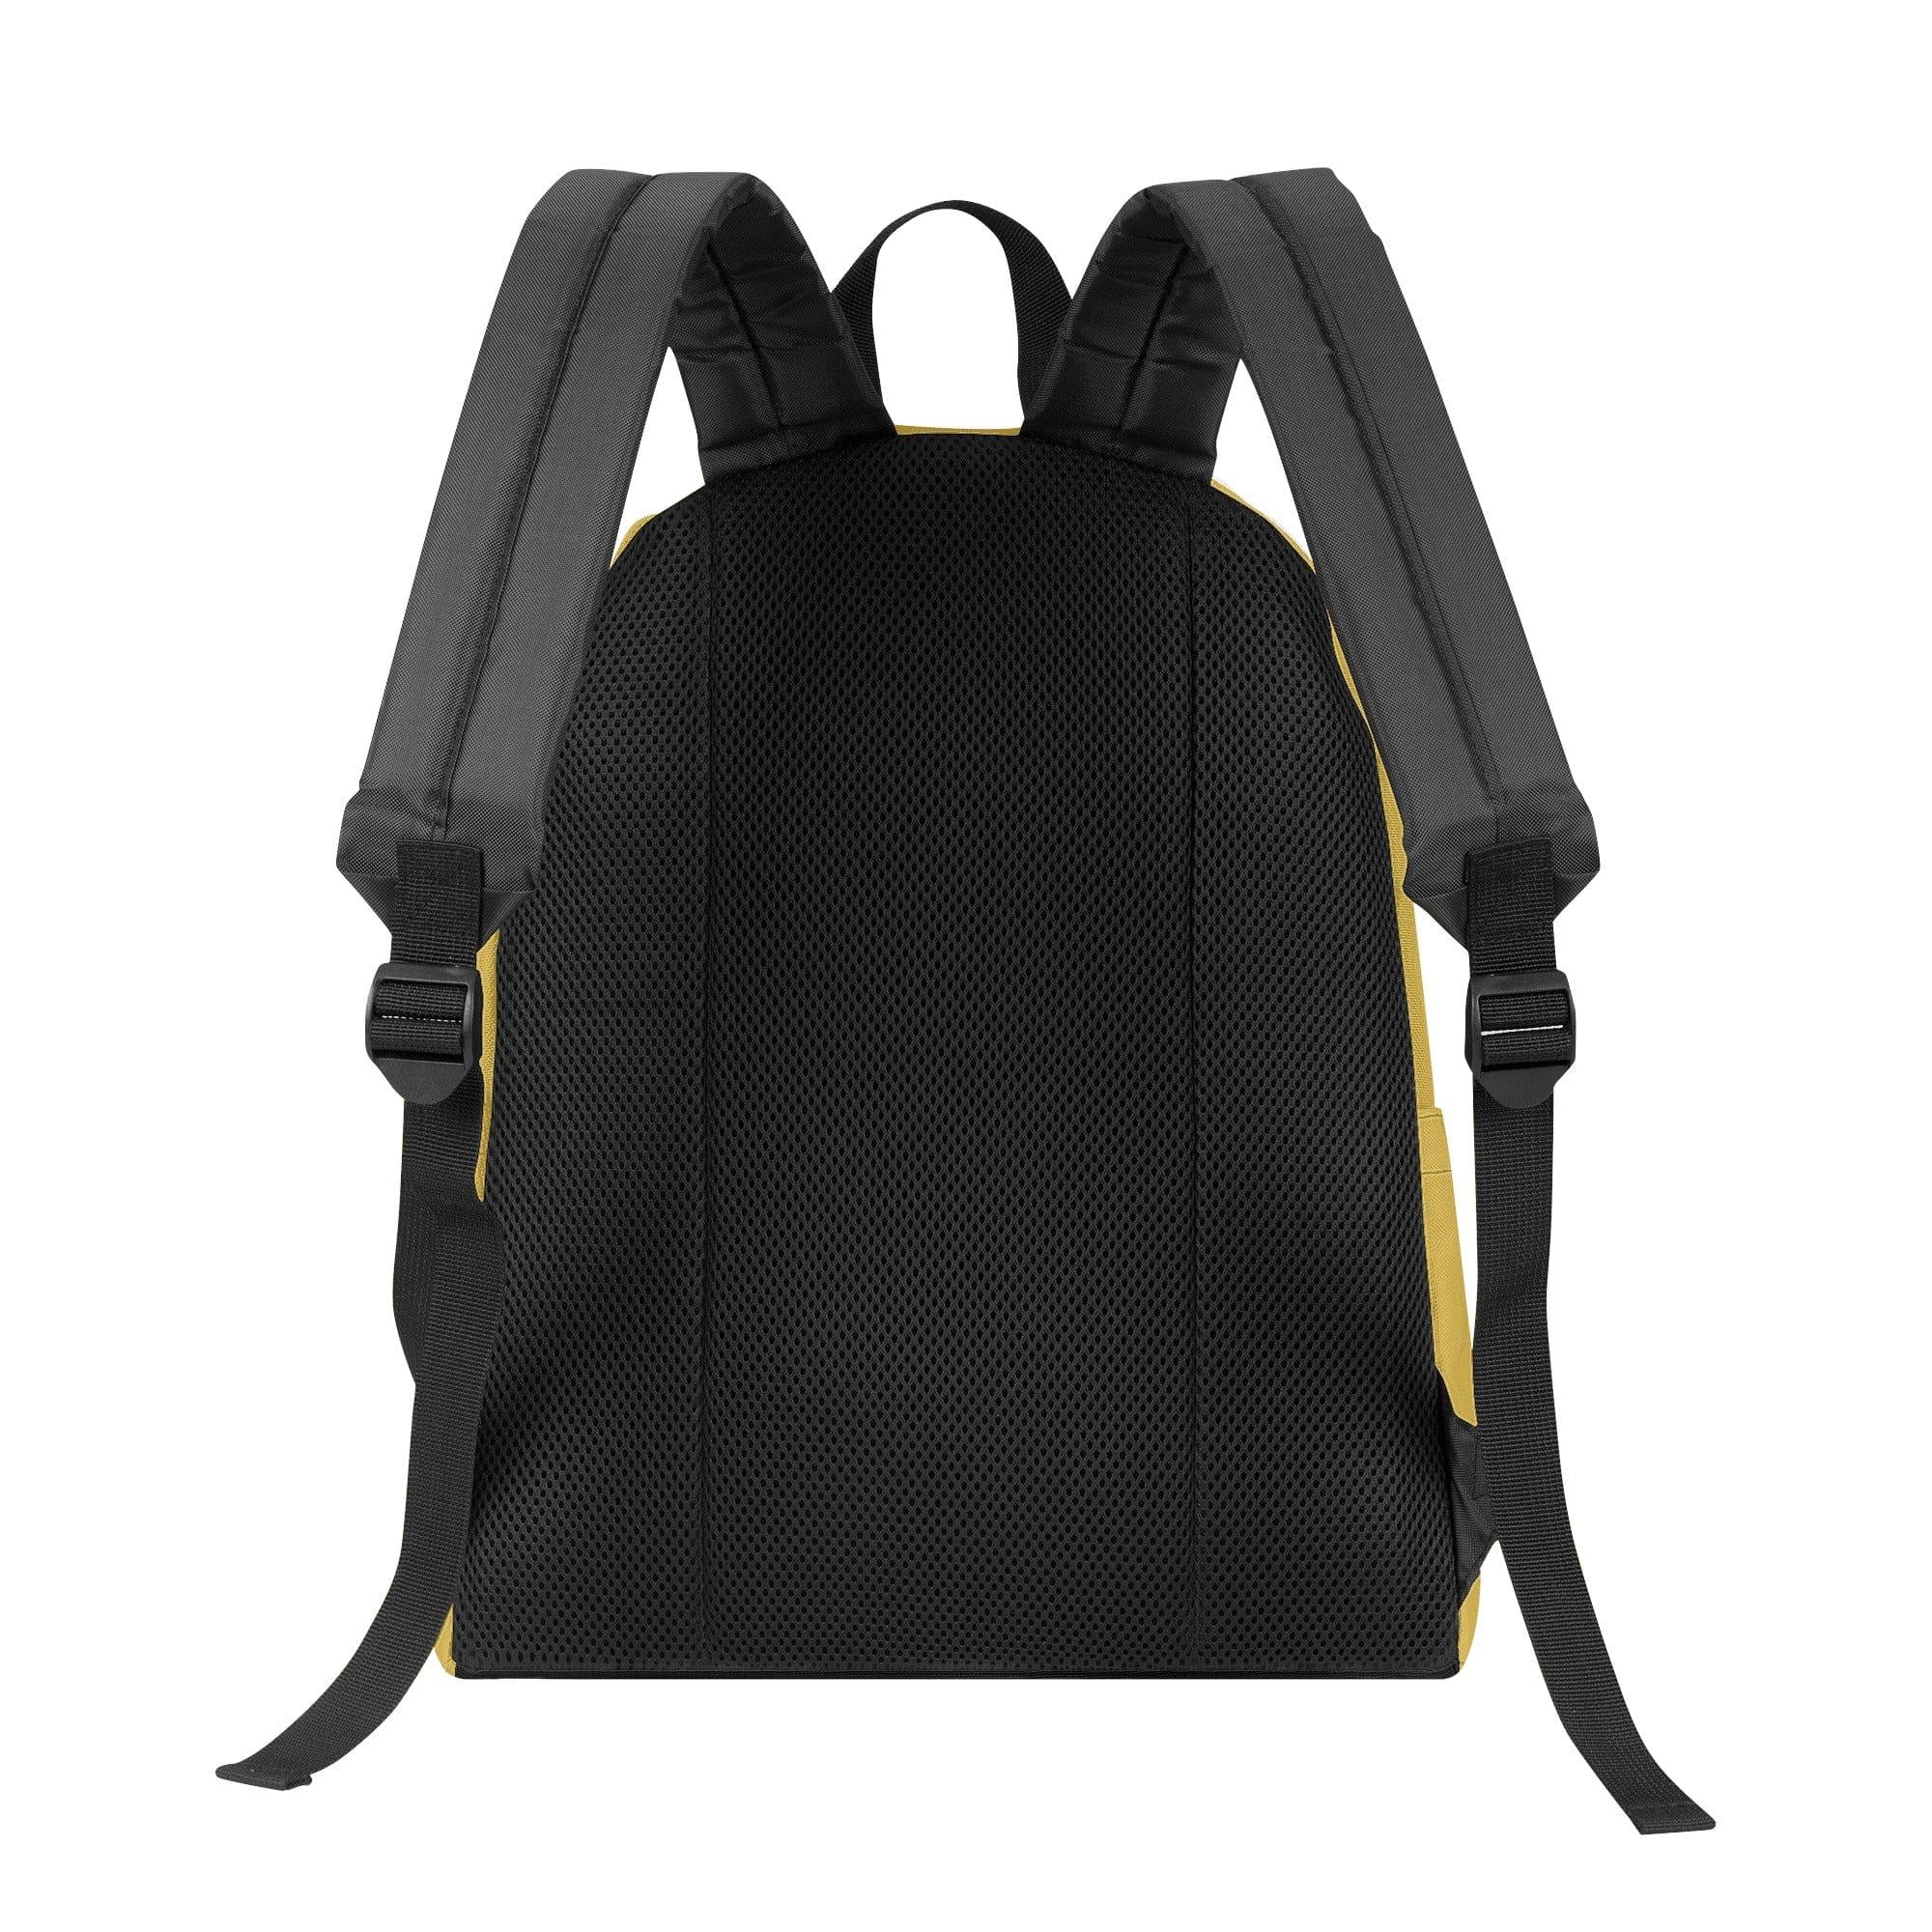 New mo.be embroidered Backpack - mo.be